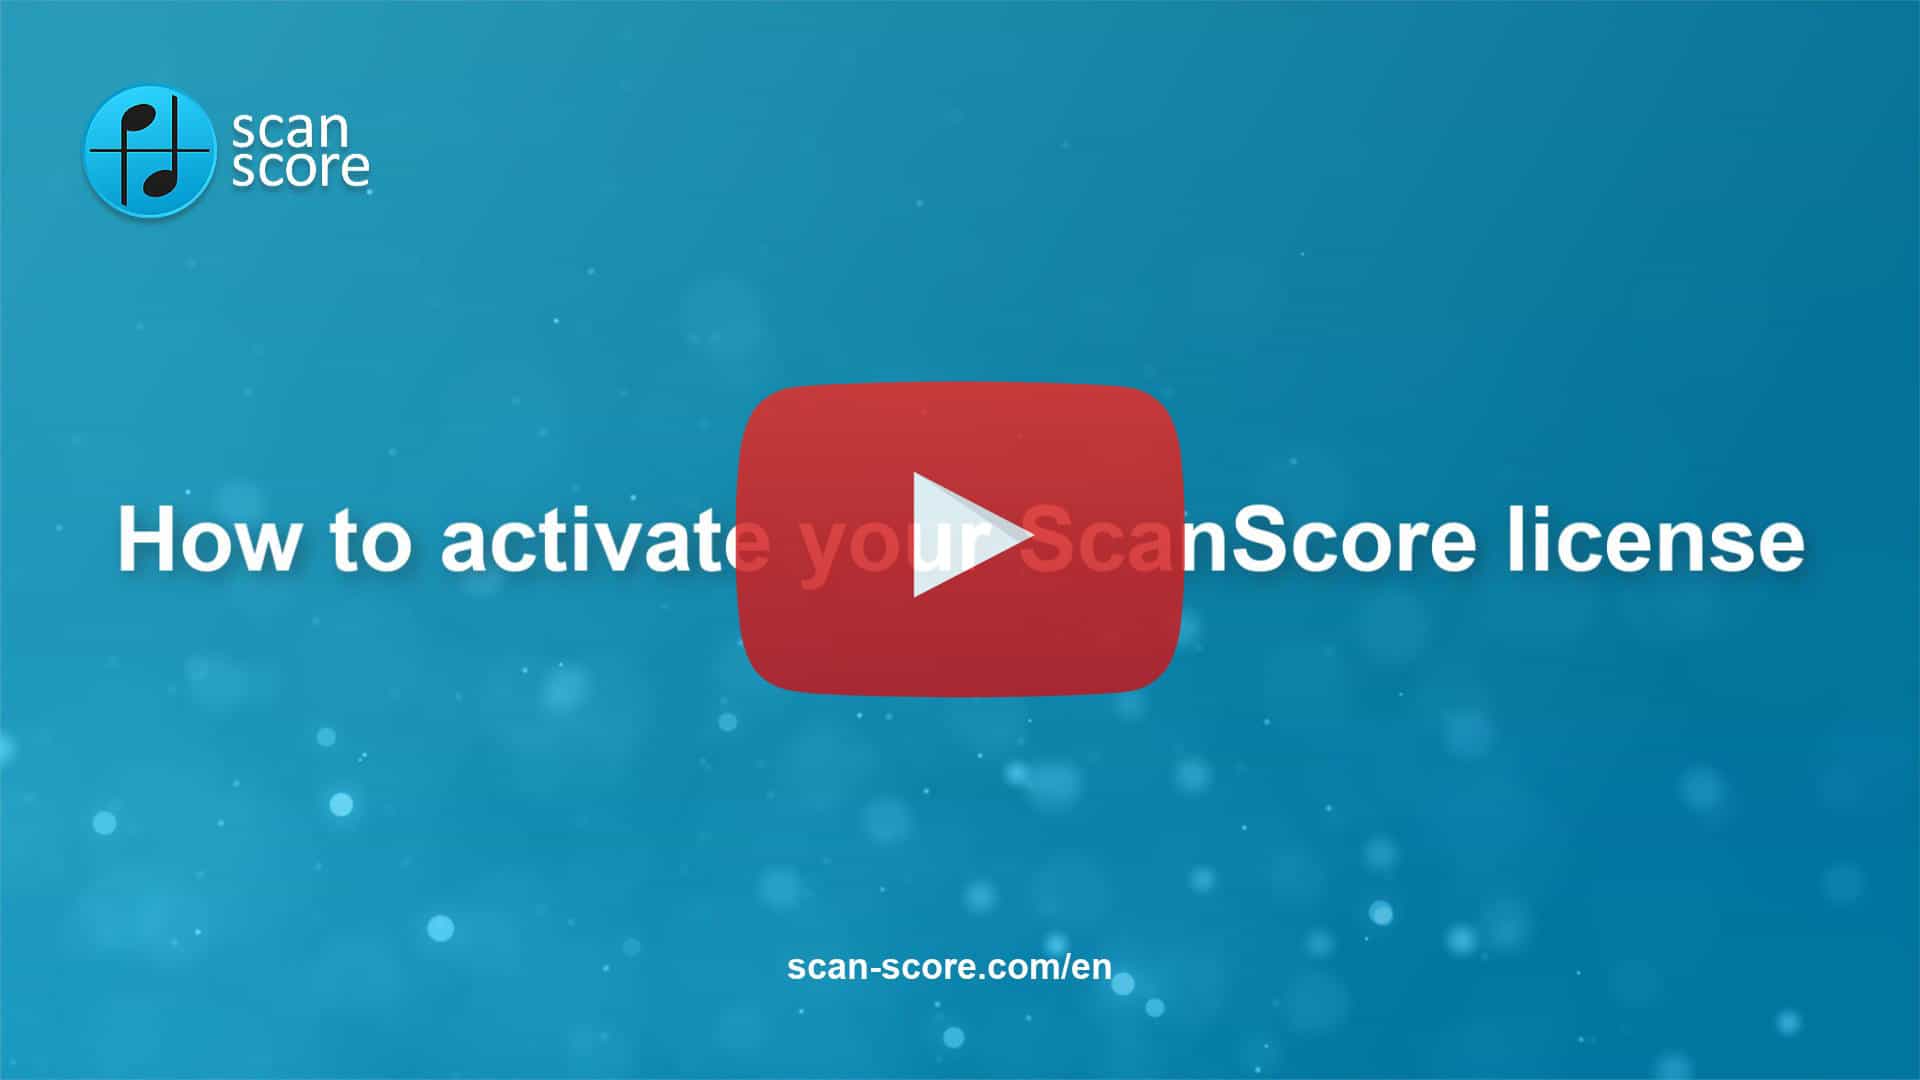 How to activate your ScanScore license